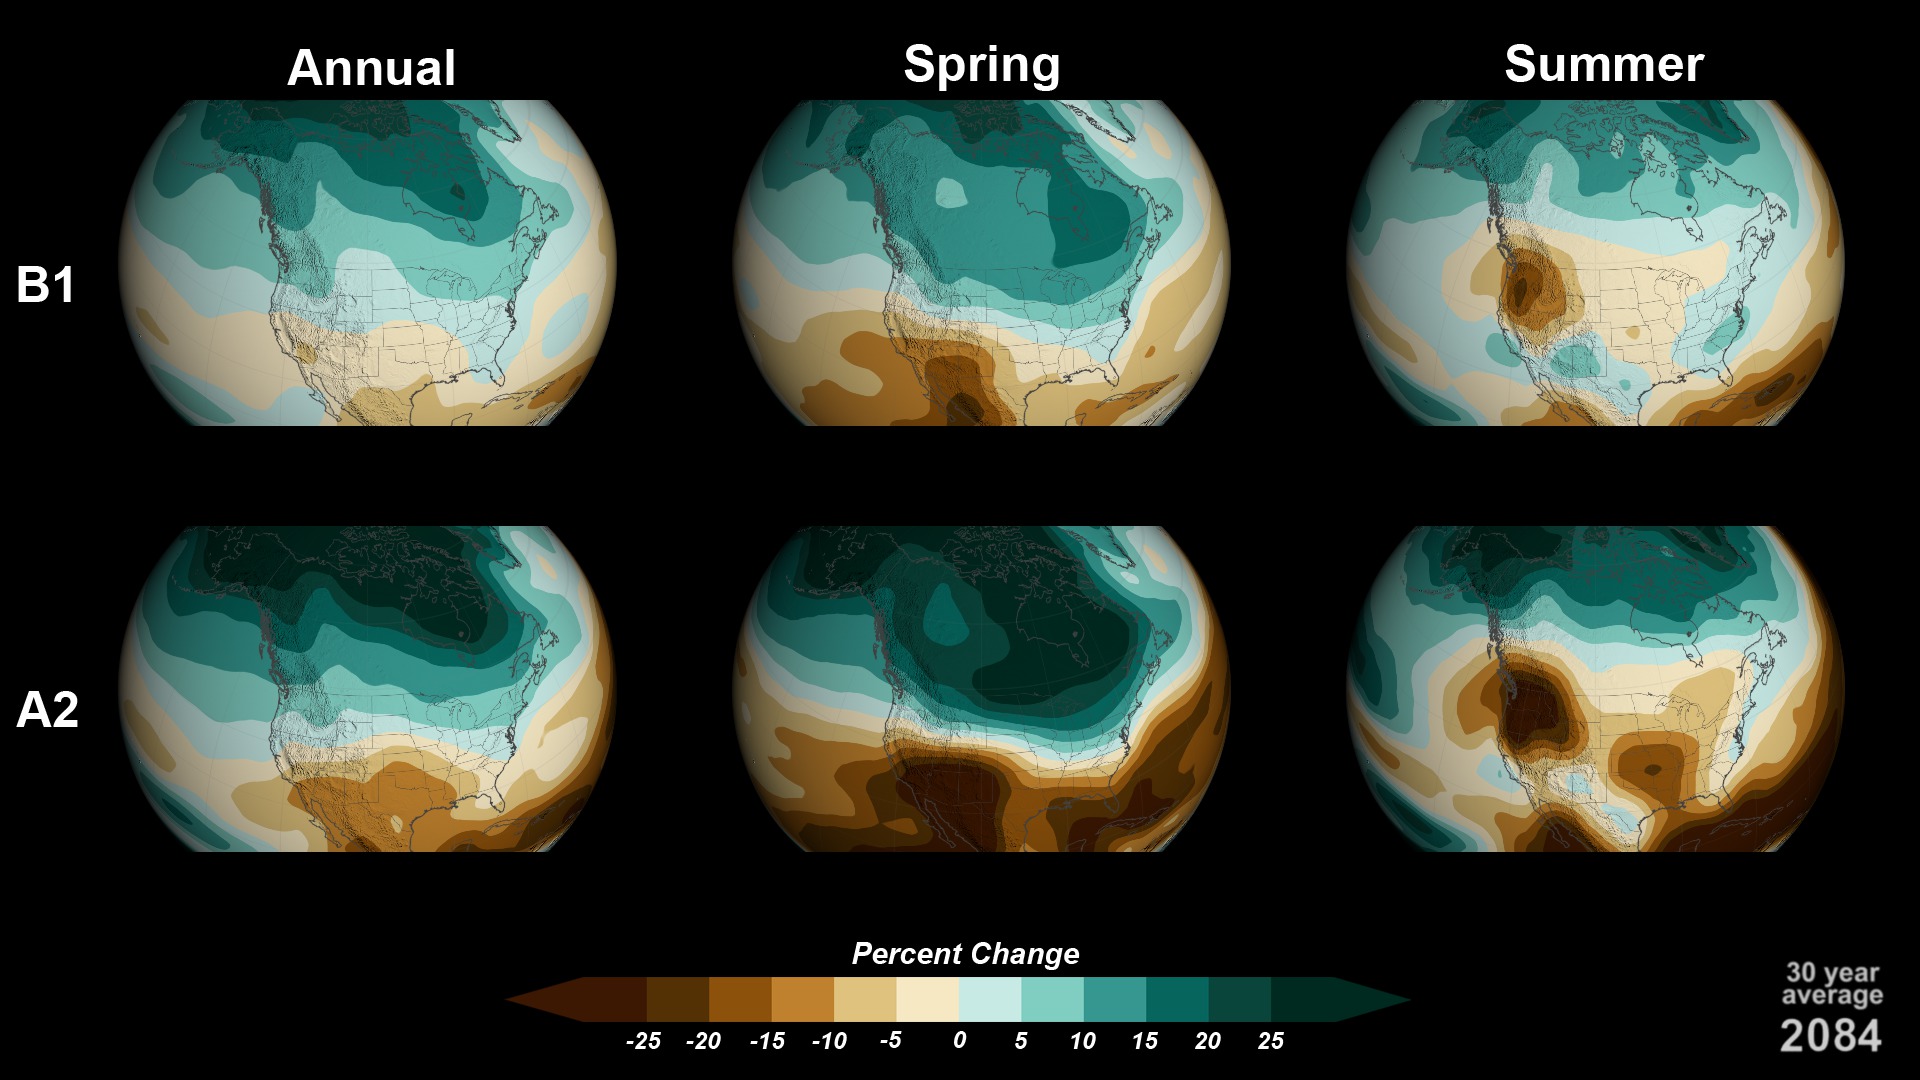 Mosaic of annual, spring, and summer precipition visualizations